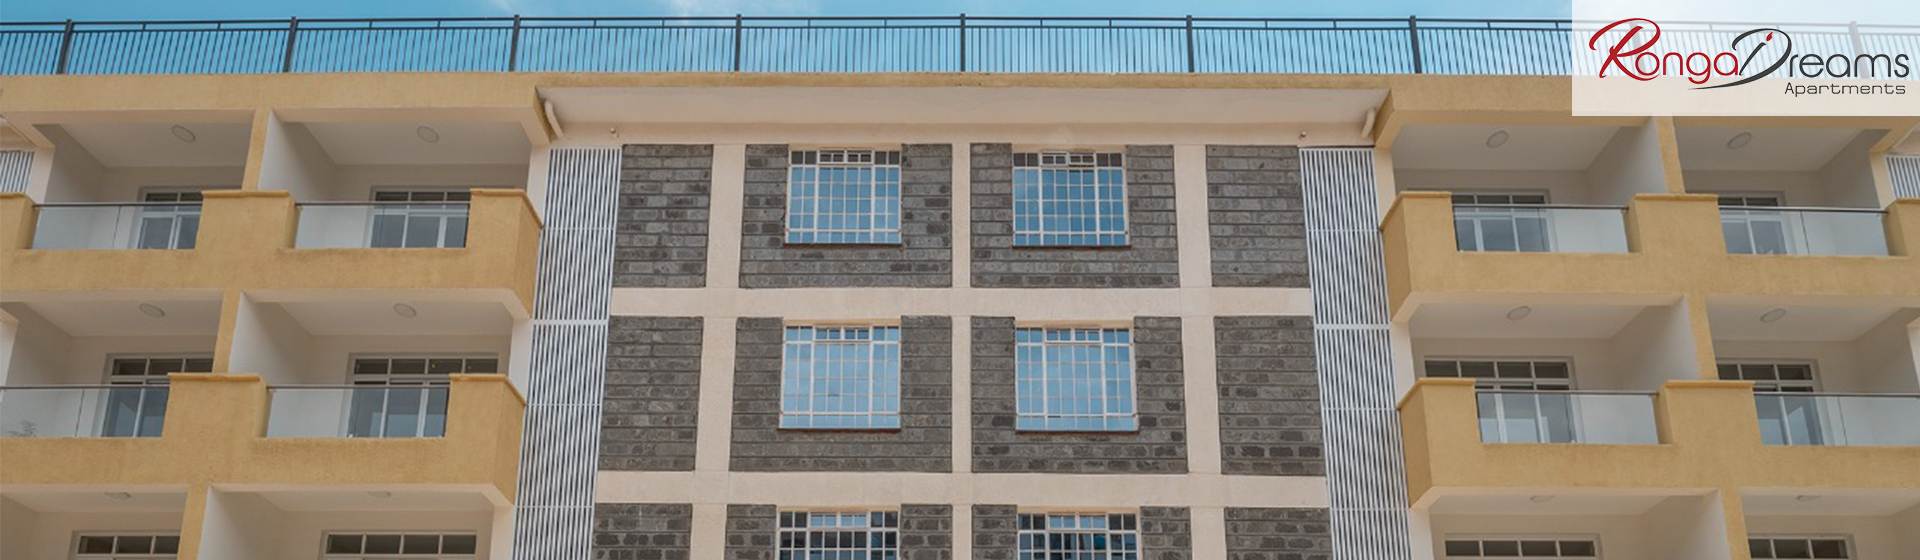 Rongai Dreams Apartment (Completed & Sold Out)